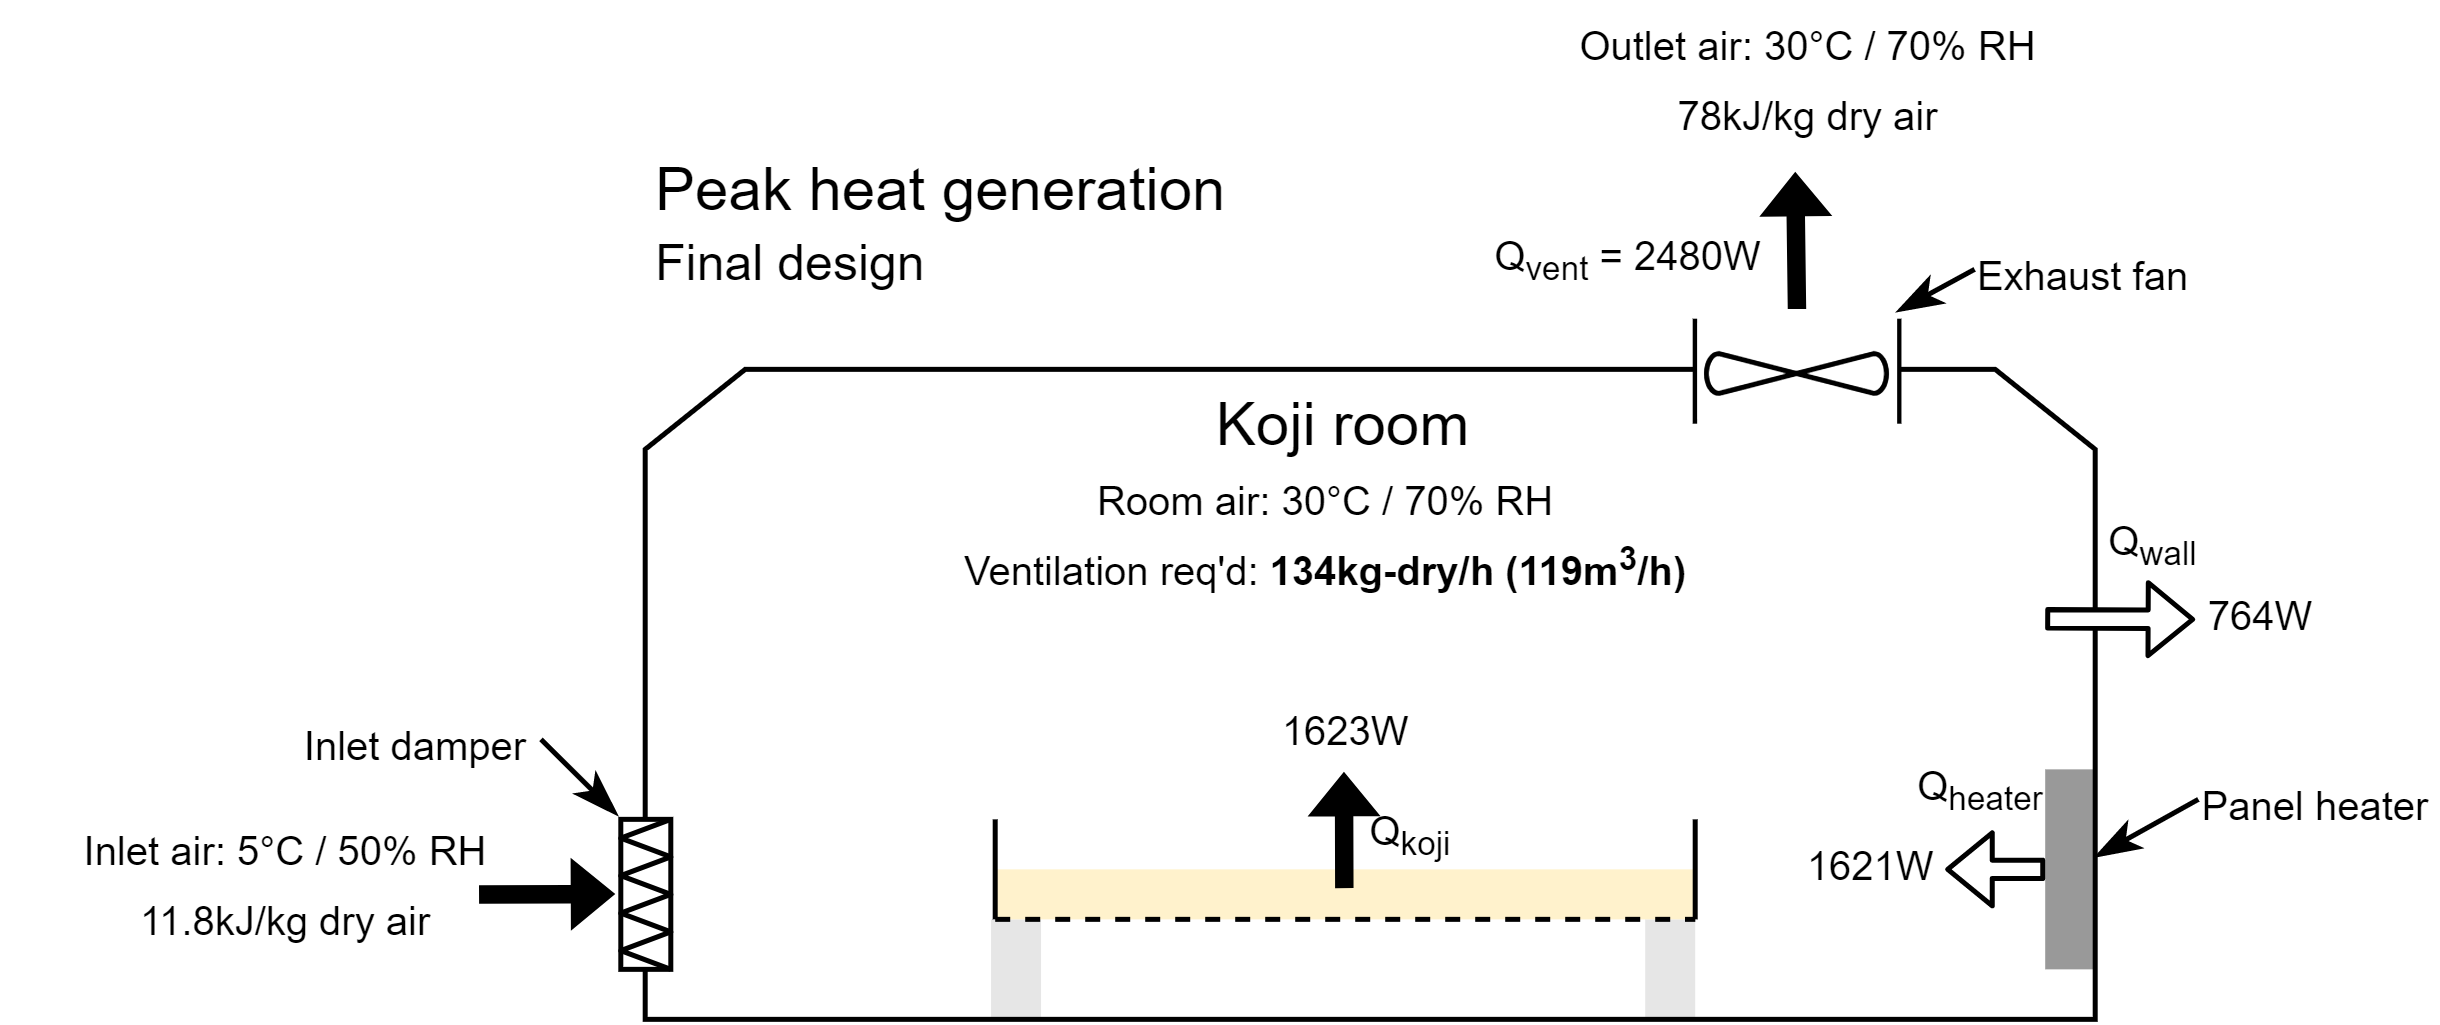 Final heat balance the koji room with ventilation with ventilation sized for moisture removal